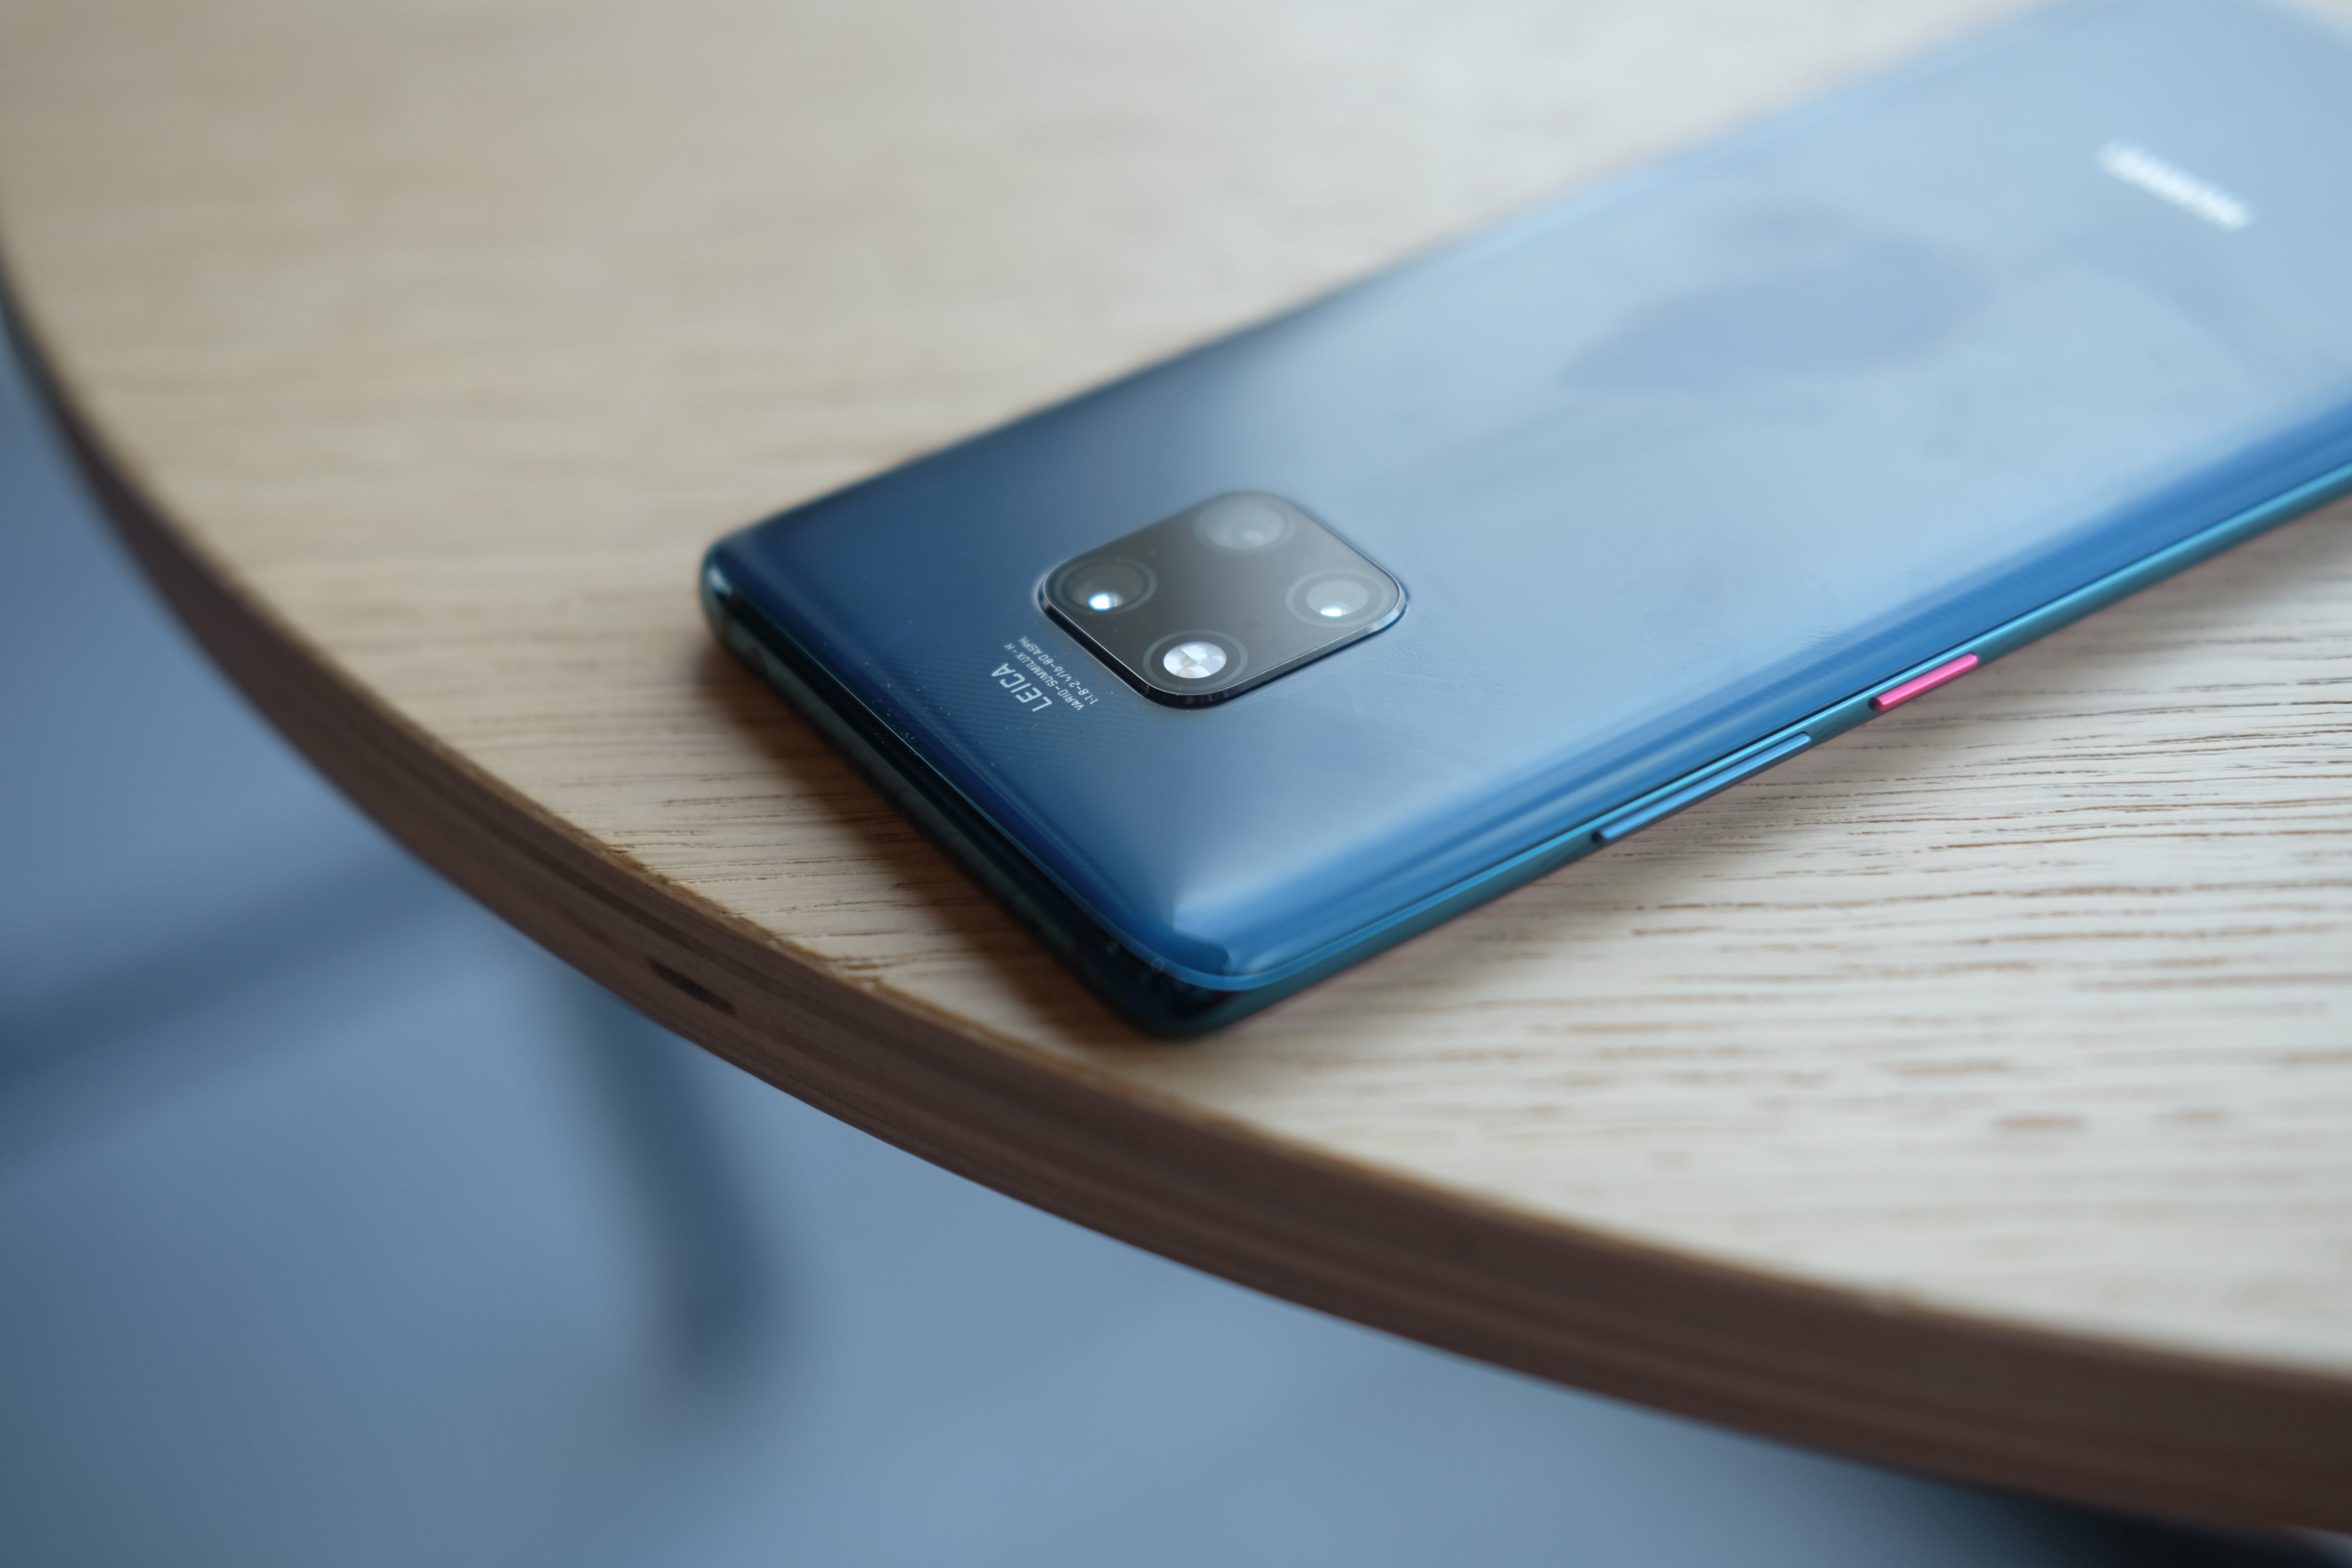 leveren Ontaarden ONWAAR Huawei Mate 20 Pro review: Might be a better choice than the latest Mate